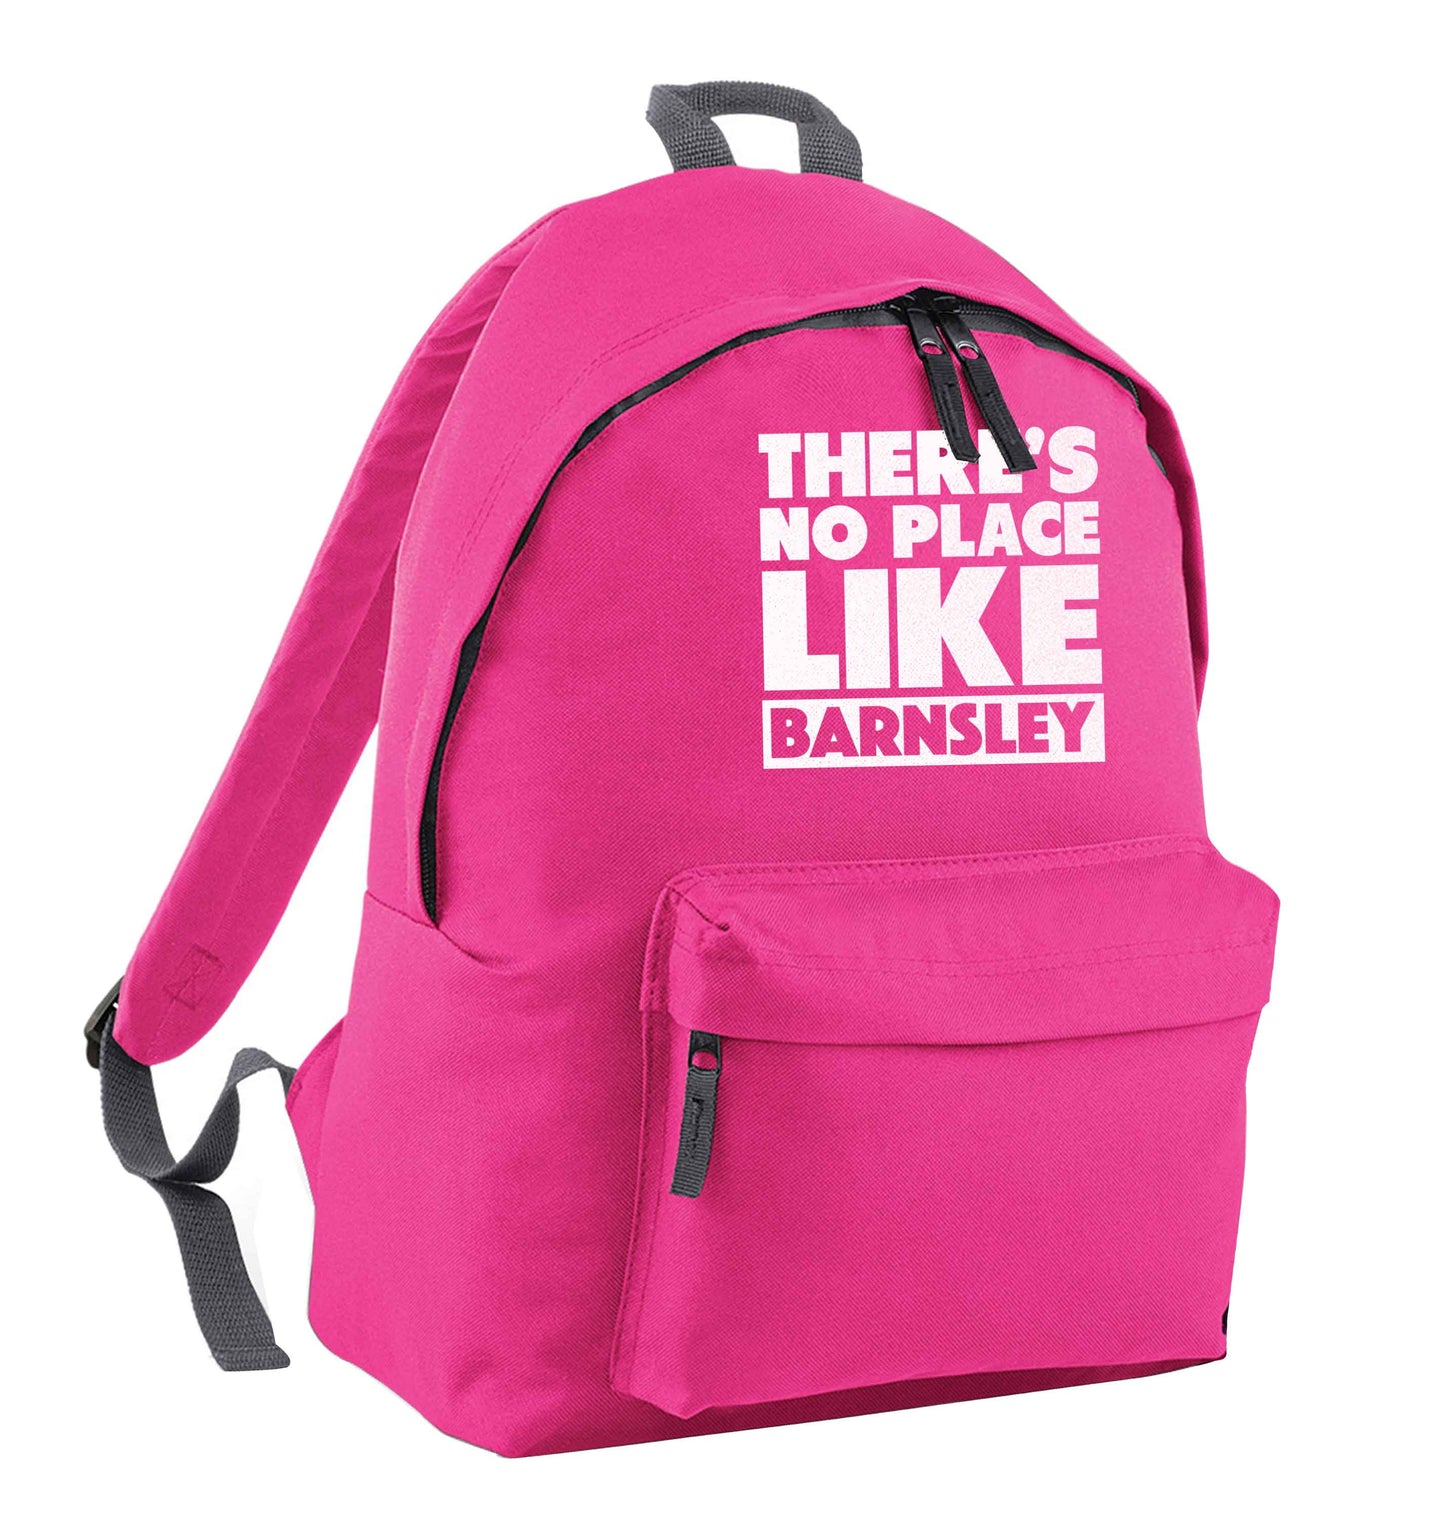 There's No Place Like Barnsley pink children's backpack